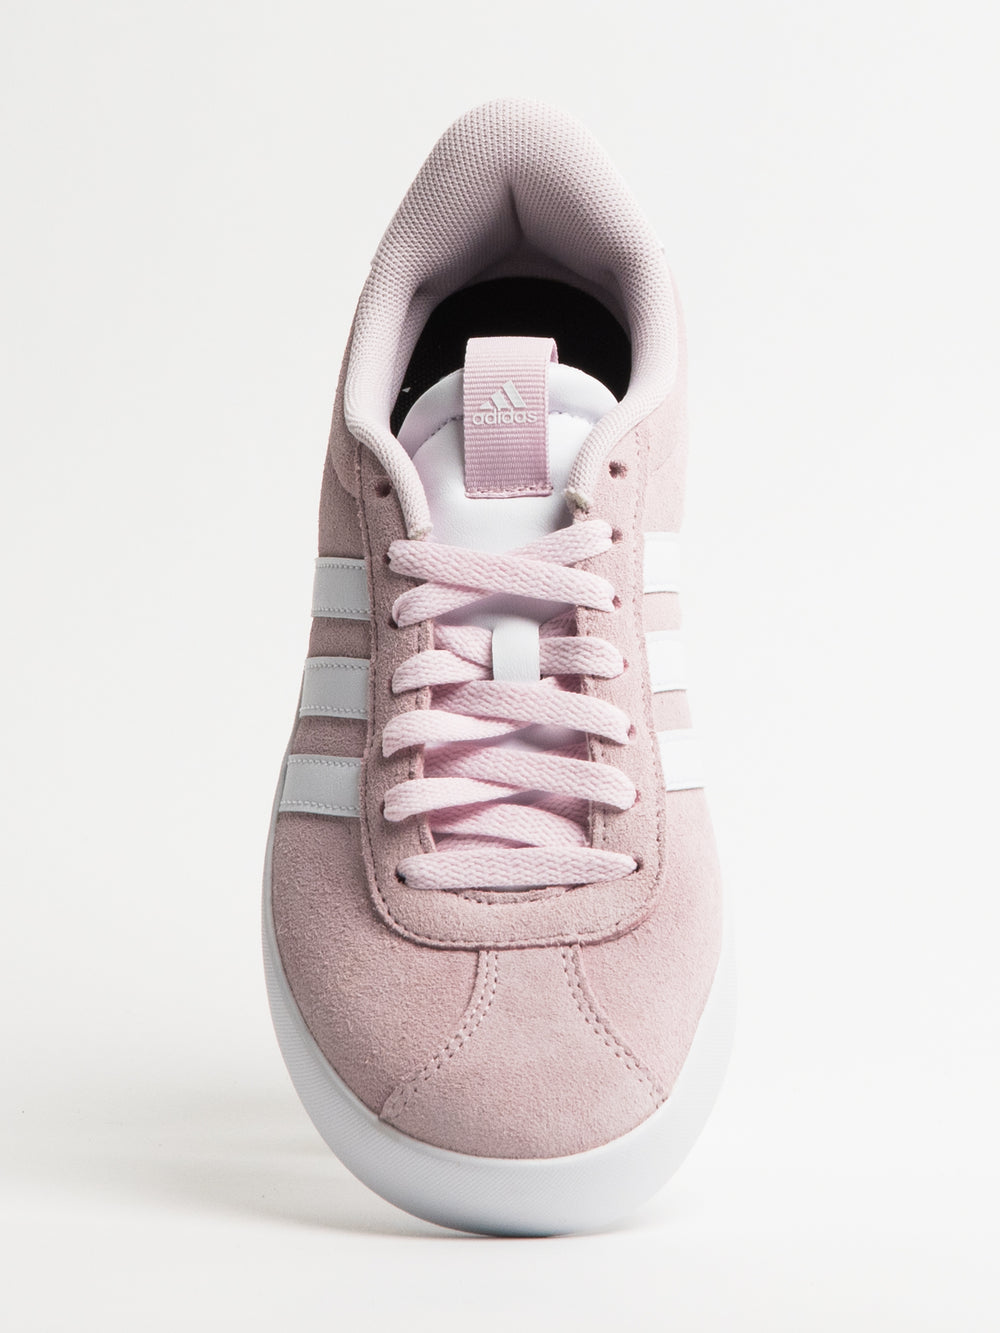 adidas VL Court 3.0 Shoes - Pink, Women's Lifestyle